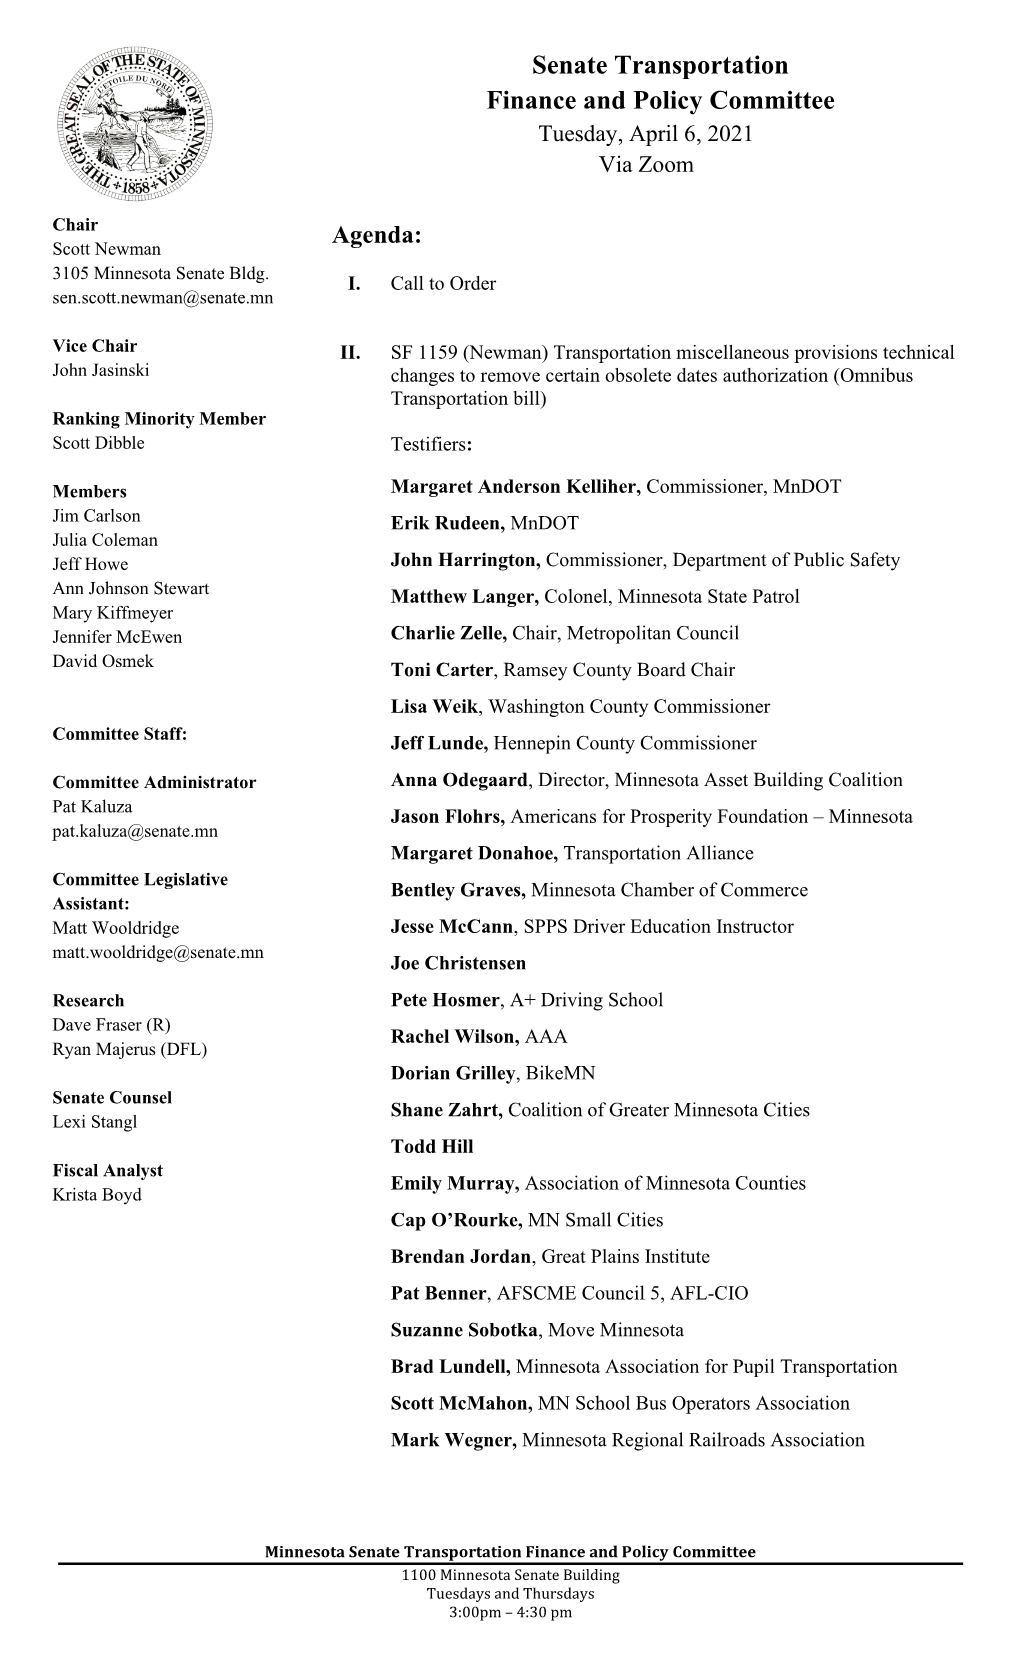 Senate Transportation Finance and Policy Committee Tuesday, April 6, 2021 Via Zoom